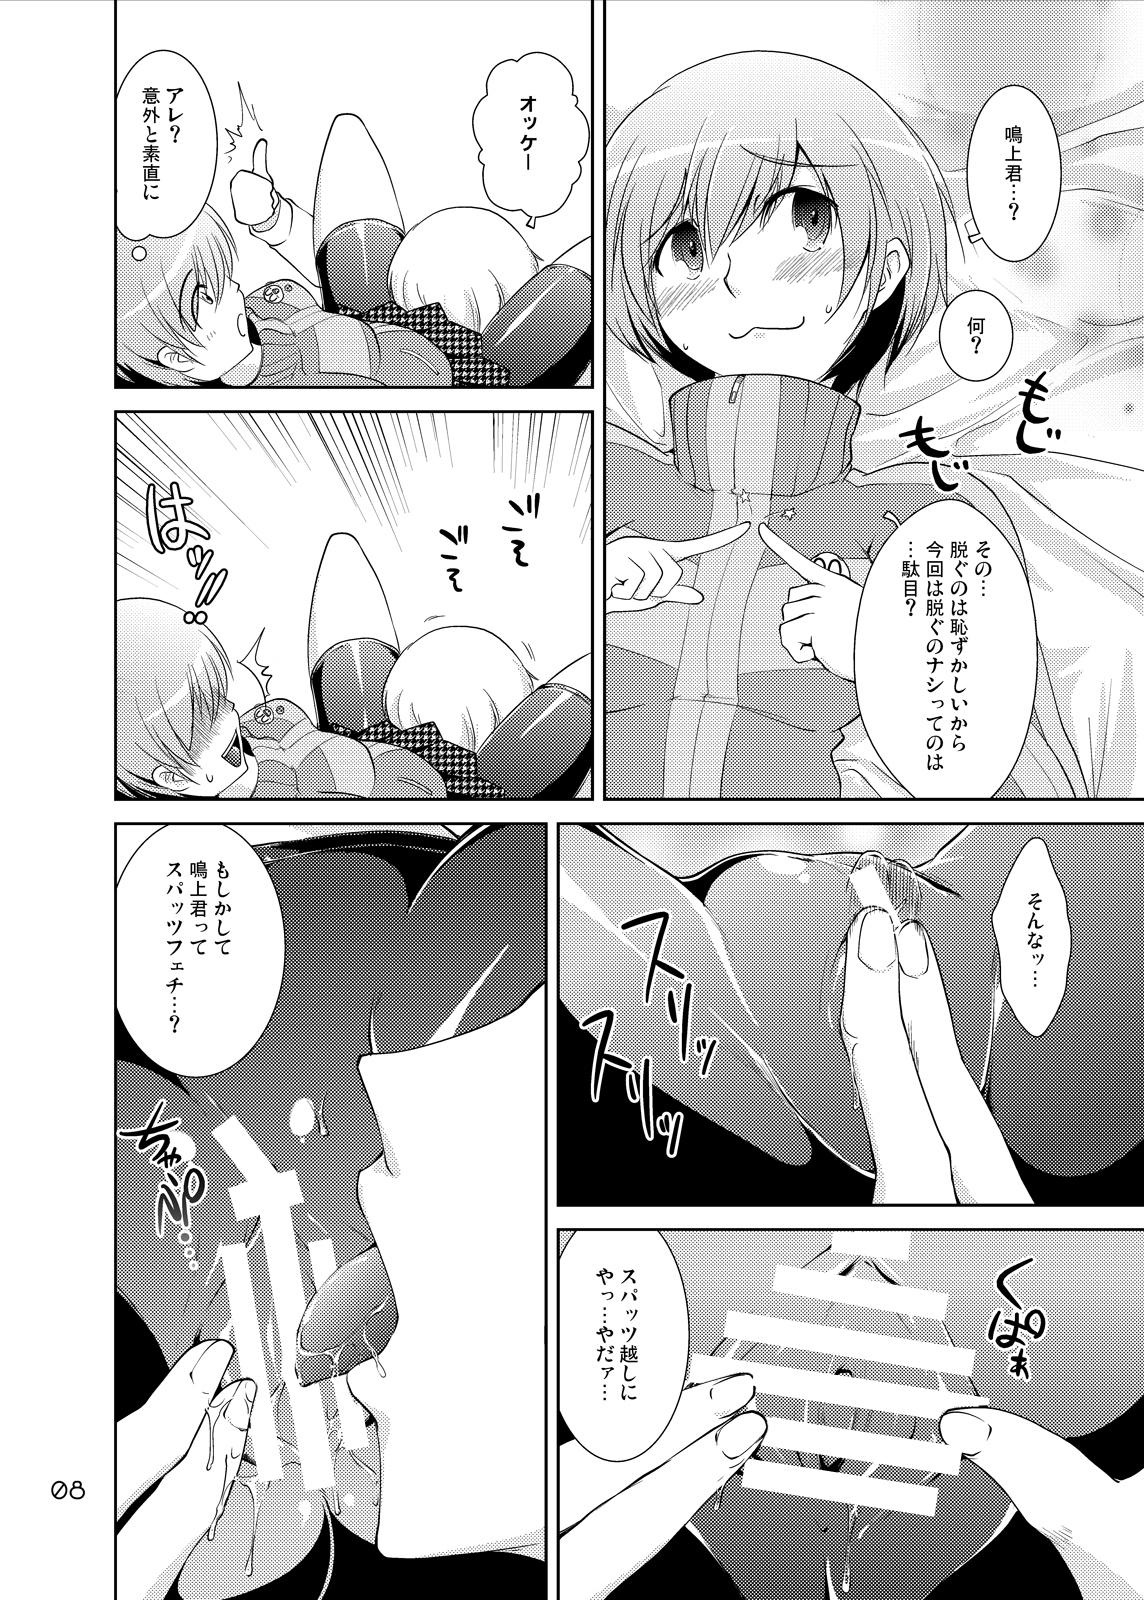 Mask S4U spats forever The UNDERGROUND insert SATONAKA CHIE - Persona 4 Softcore - Page 7